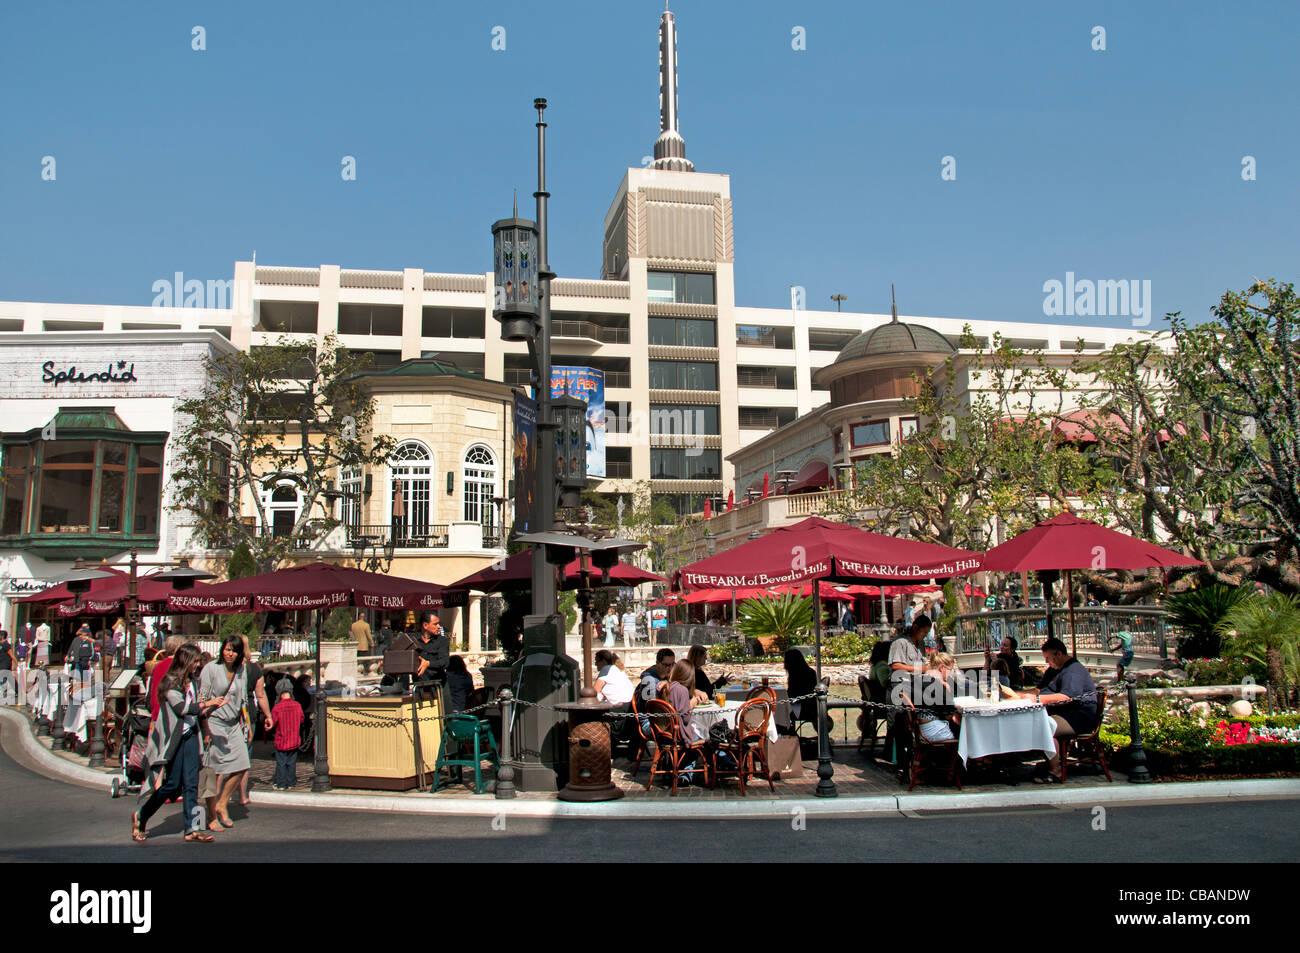 Le Grove Farmers Market retail entertainment shopping mall Los Angeles California United States Banque D'Images